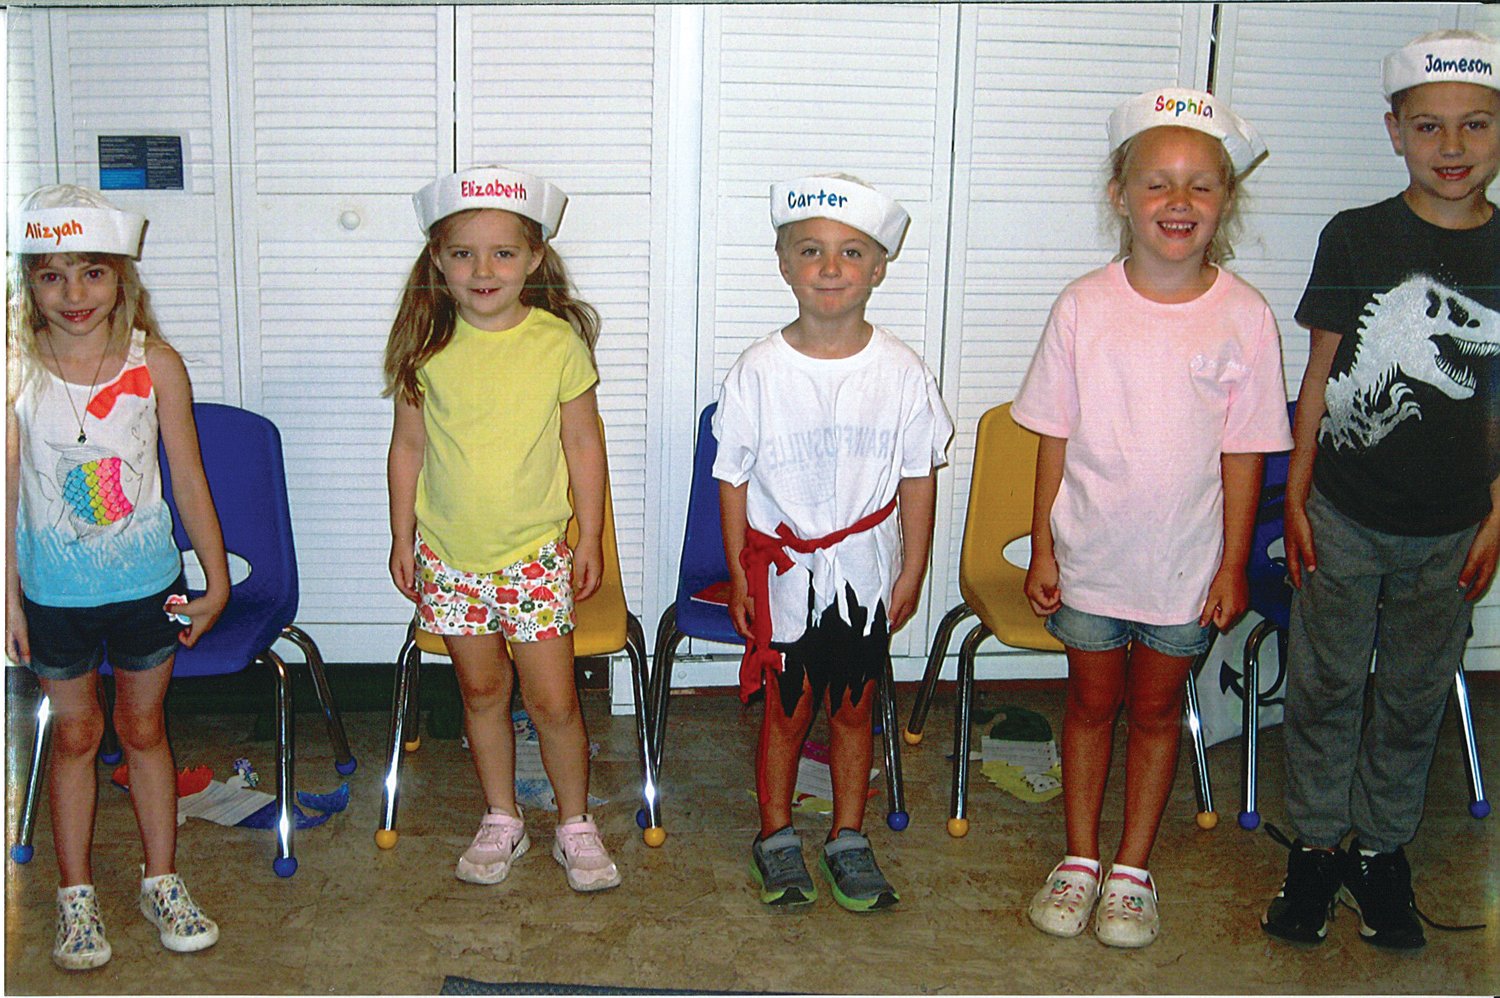 Students, from left, Alizyah Surber, Elizabeth Ryker, Carter Bokhart, Sophia Hamilton and Jameson Whitecotten, complete a four-week intensive summer reading pogram called